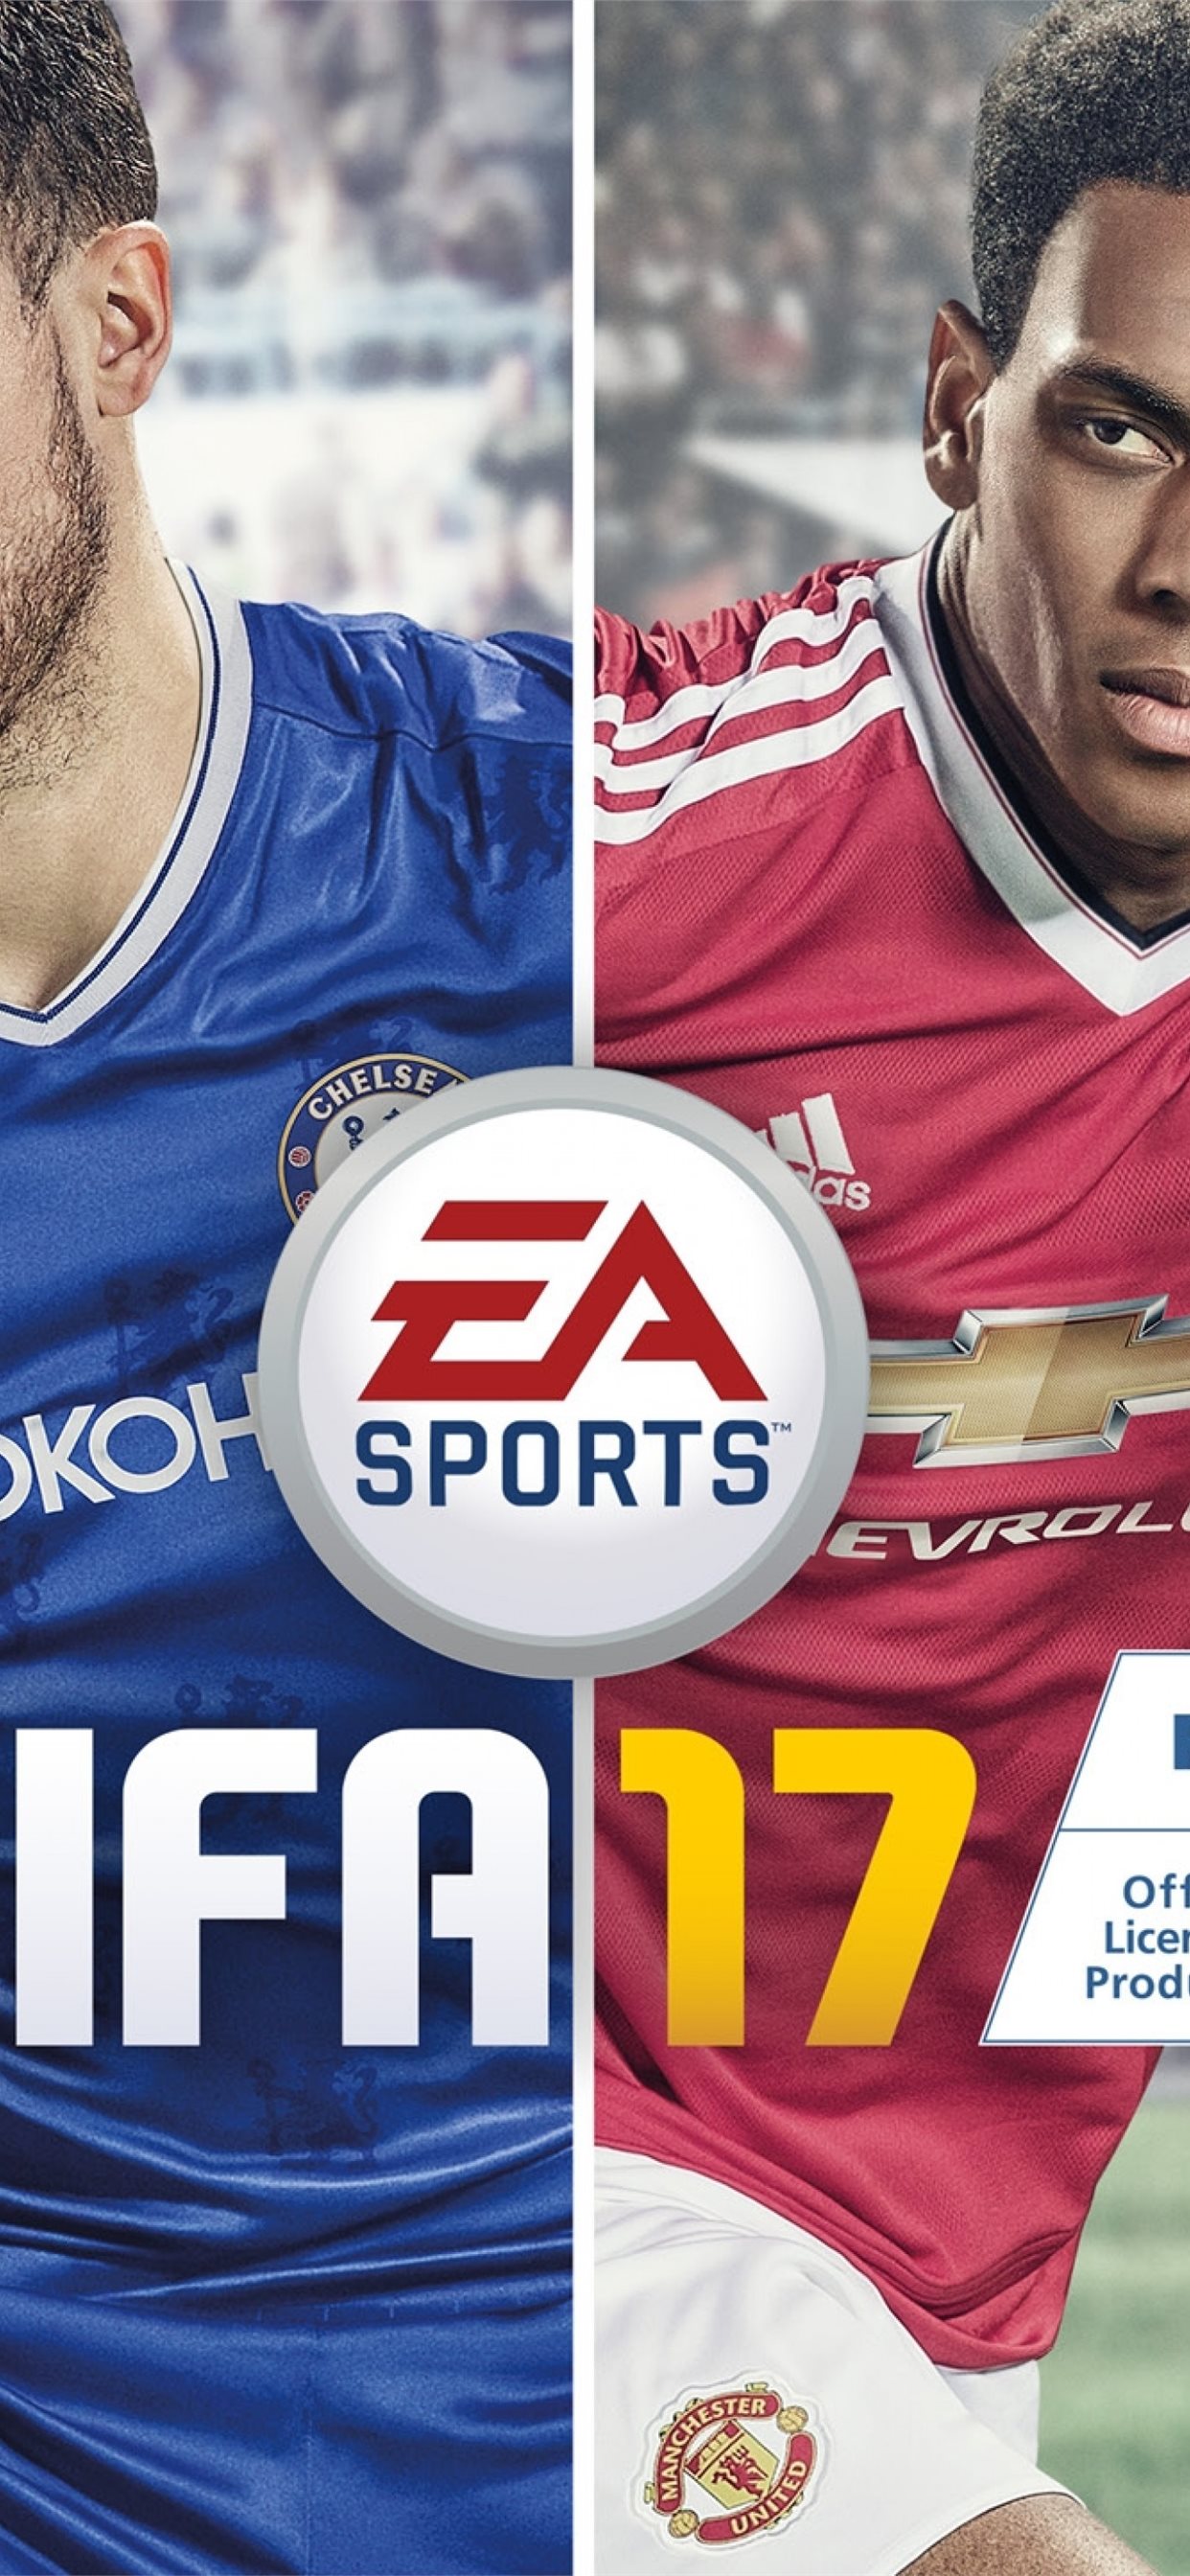 Fifa 17 Madrid Chelsea Manchester United Borussia ... iPhone X Wallpapers  Free Download